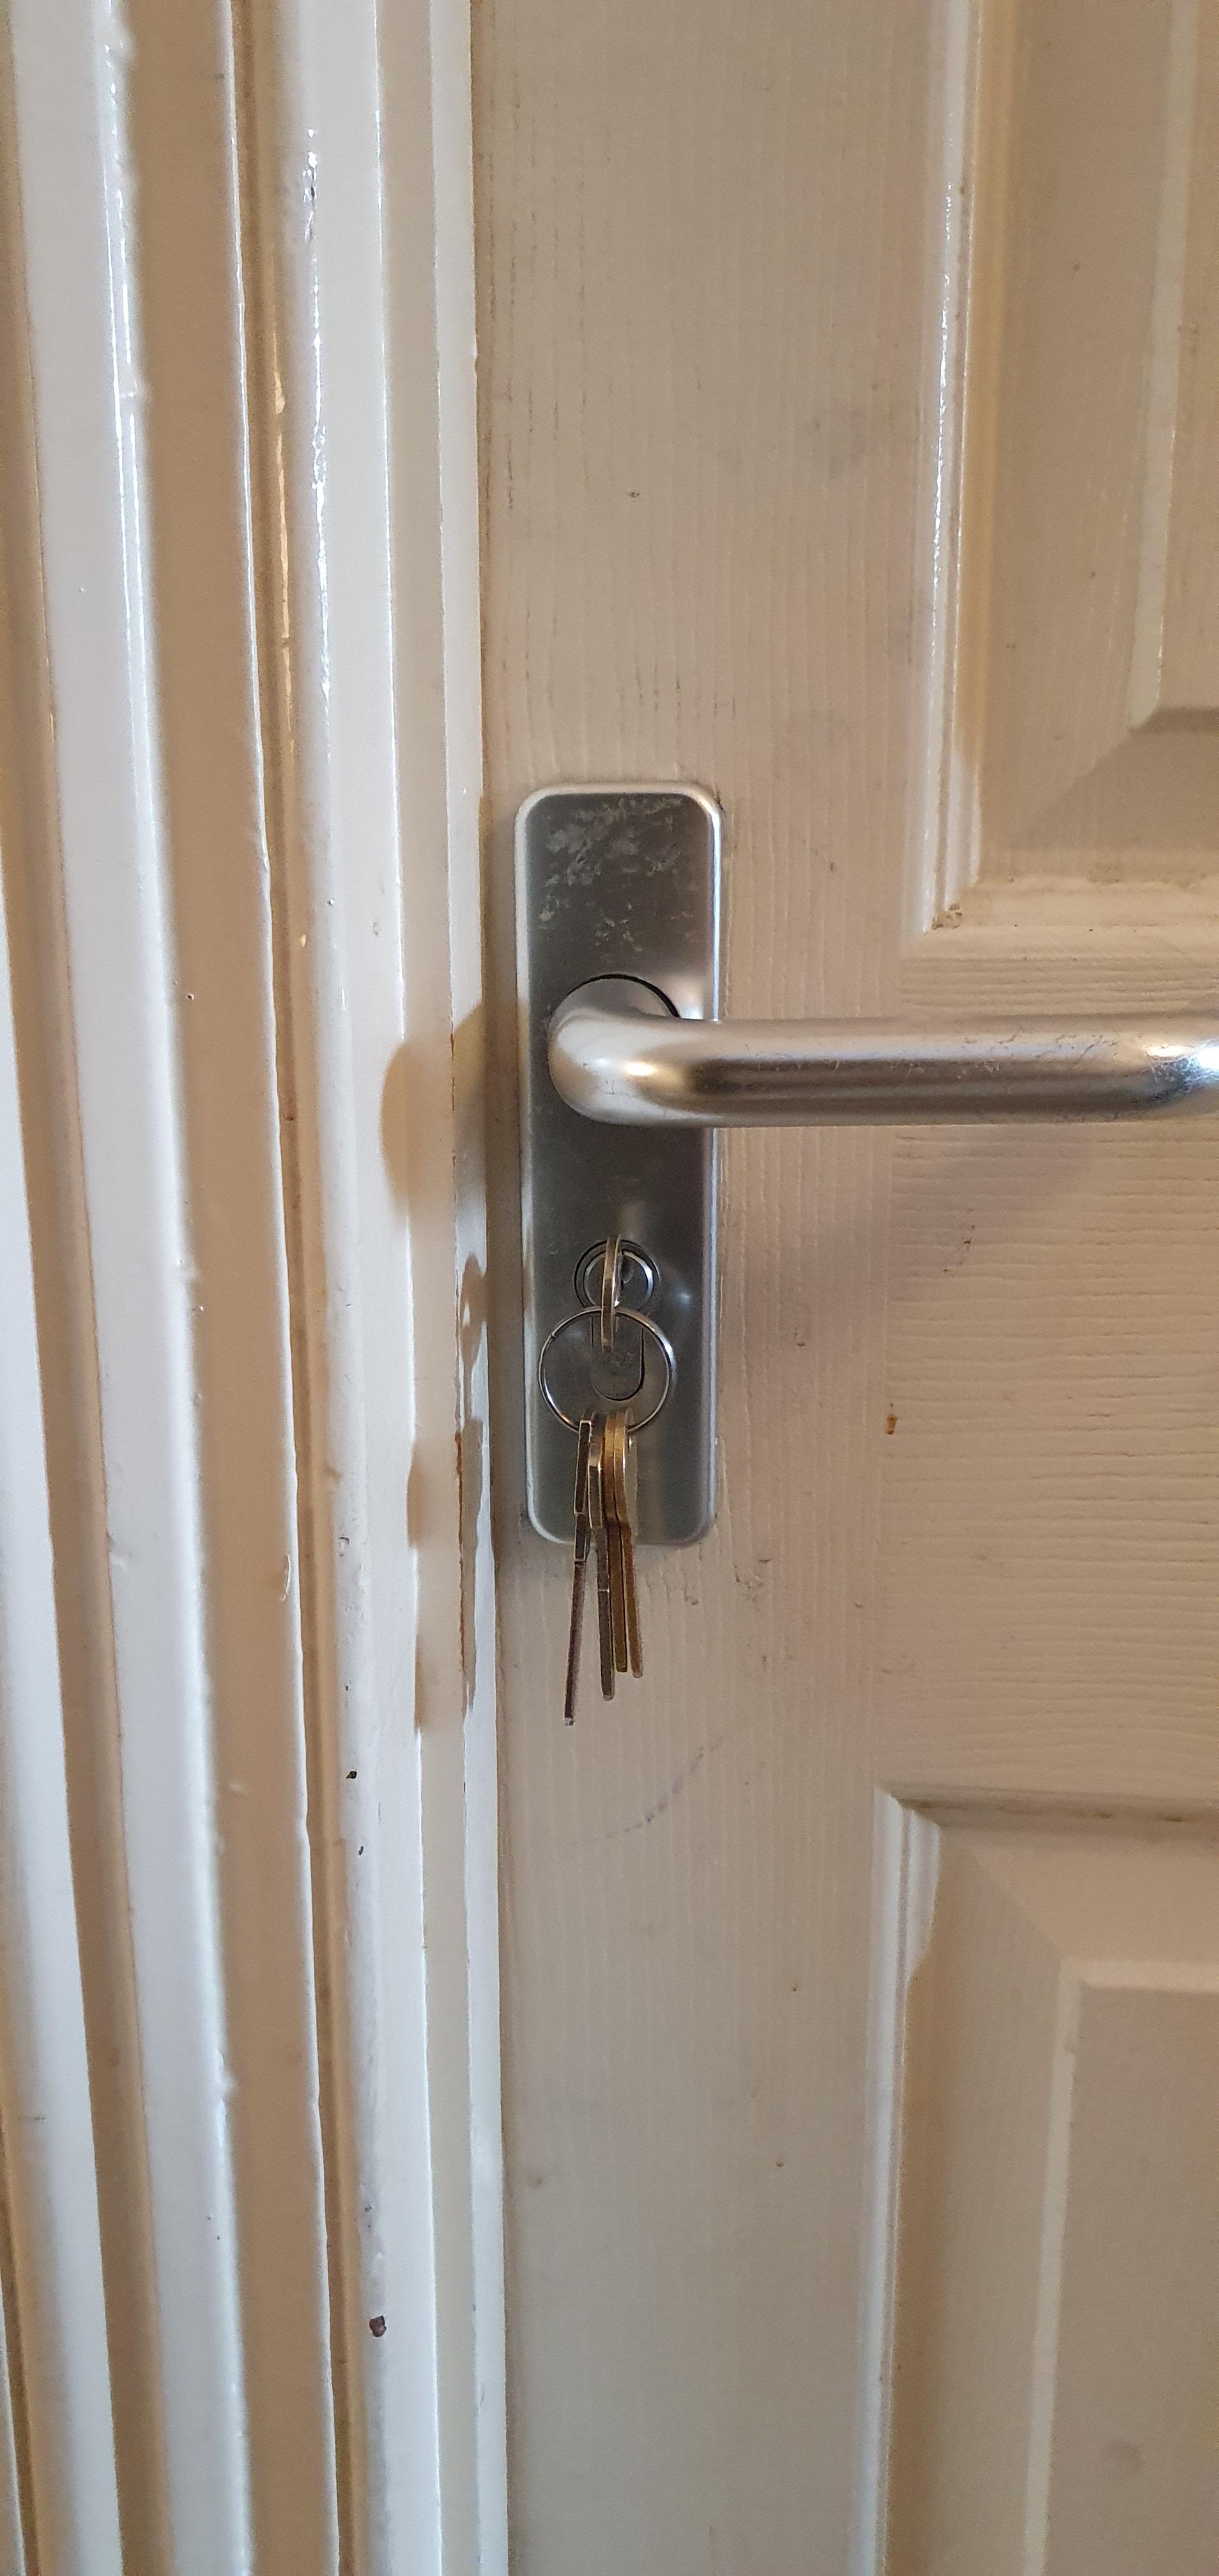 A photo of a completed lock changing job